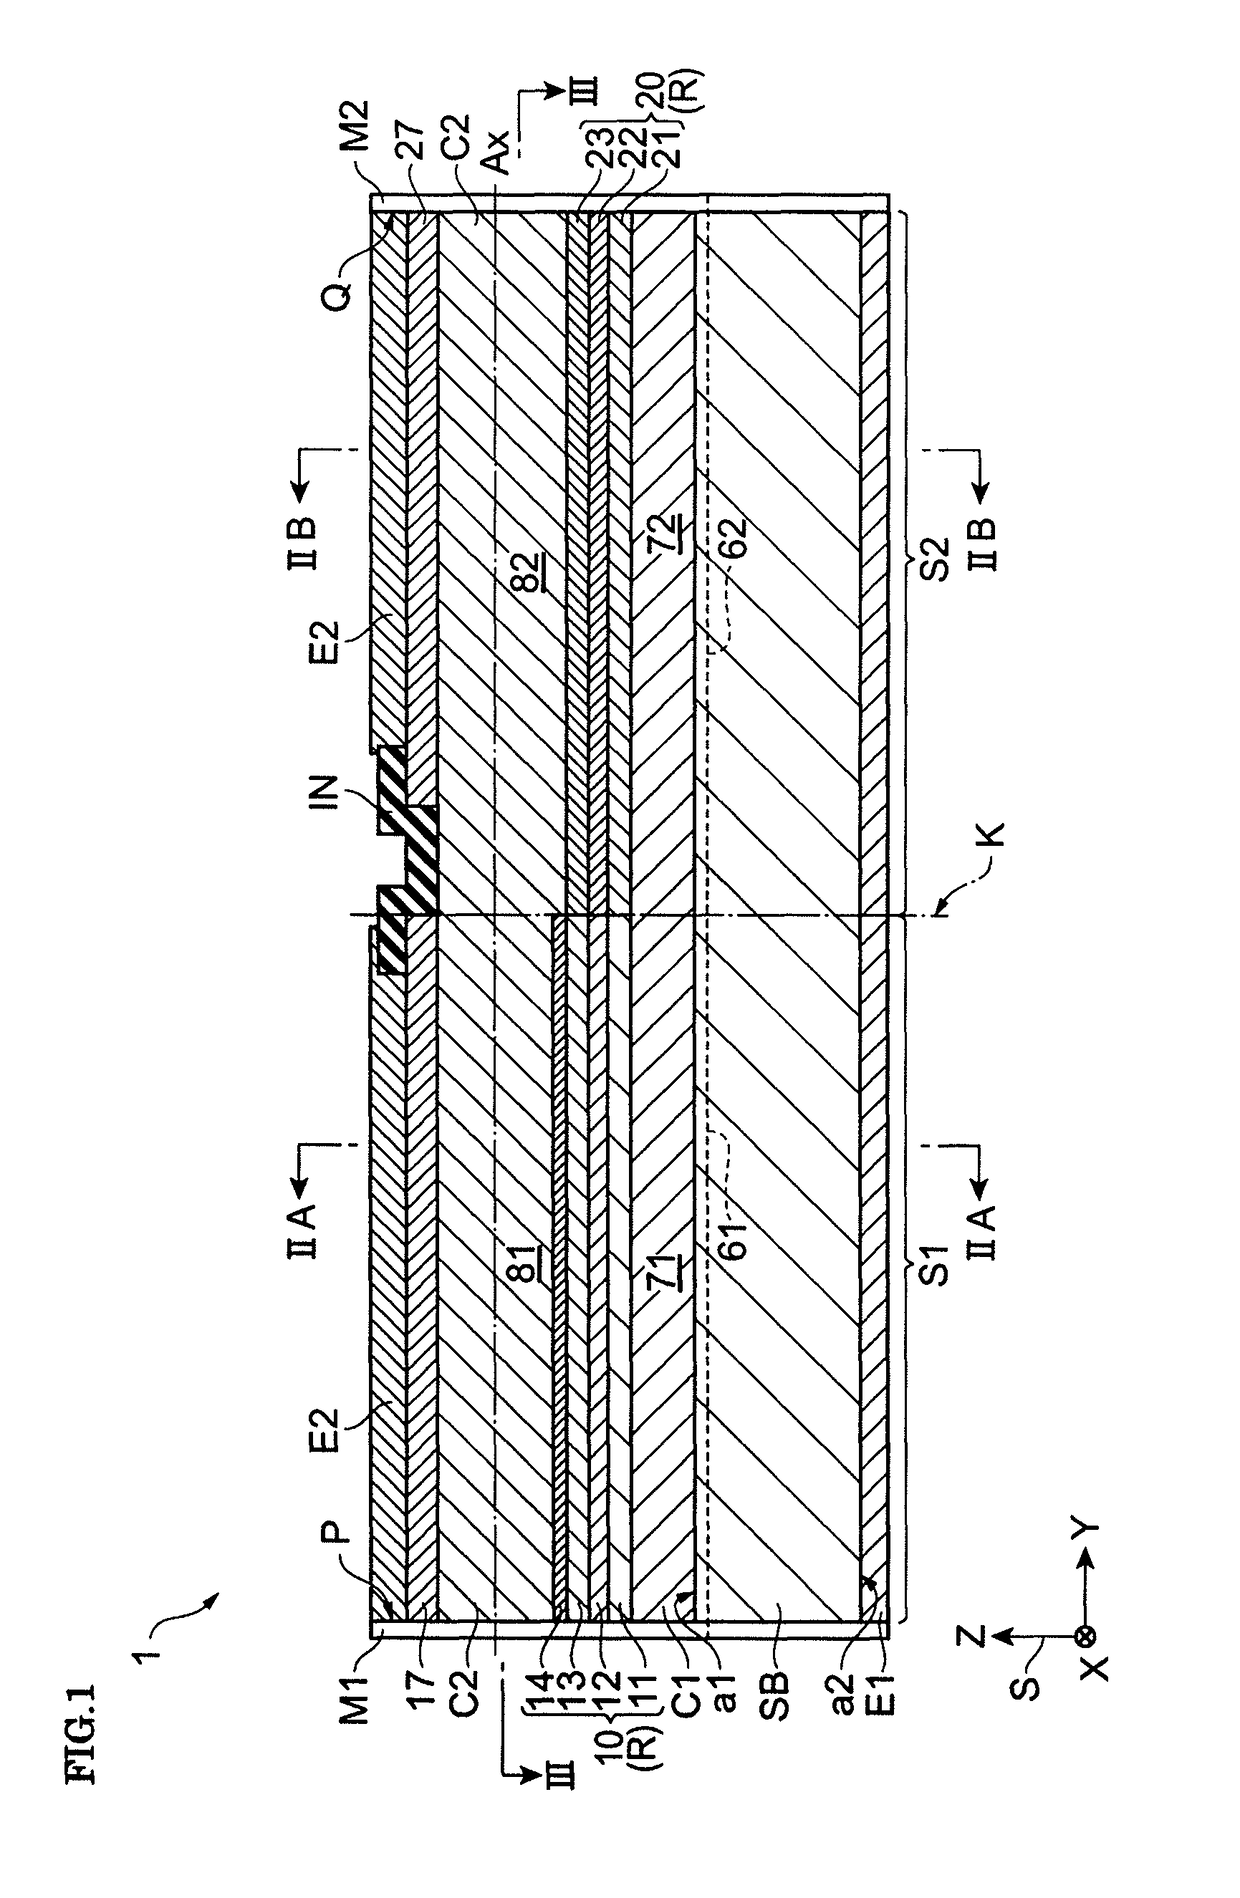 Integrated semiconductor optical device